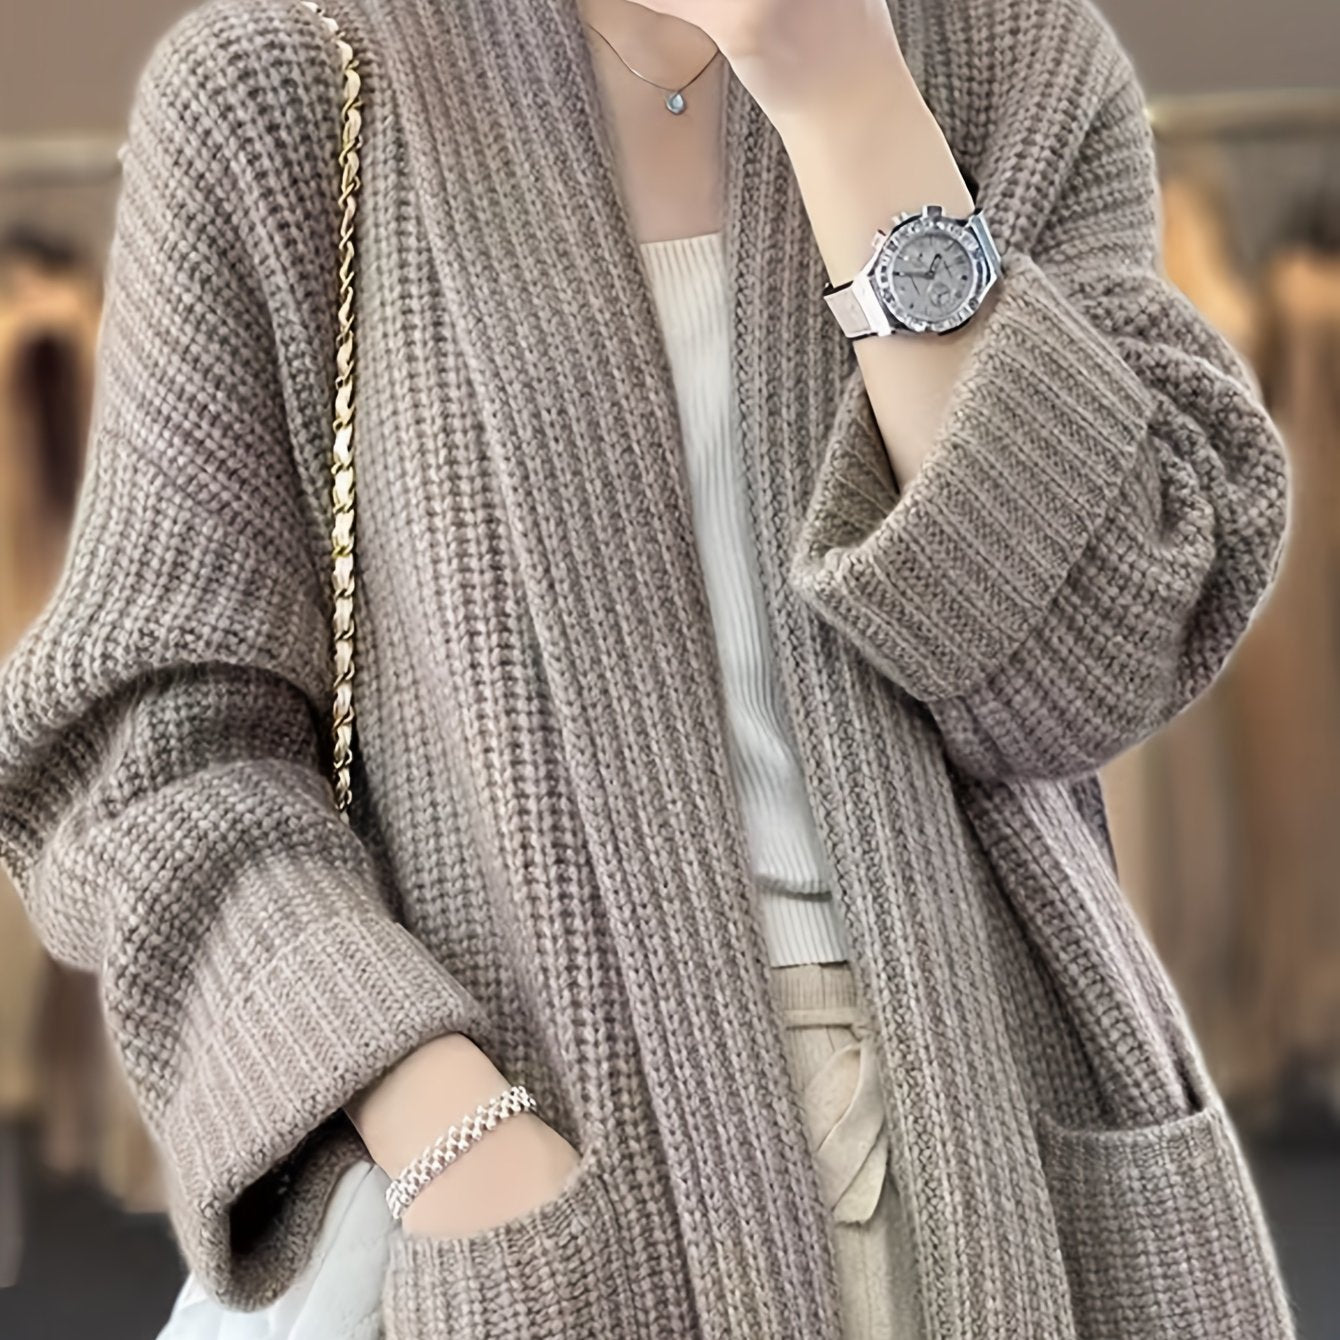 Vzyzv Solid Open Front Knit Cardigan, Casual Long Sleeve Oversized Sweater Coat With Pocket, Women's Clothing